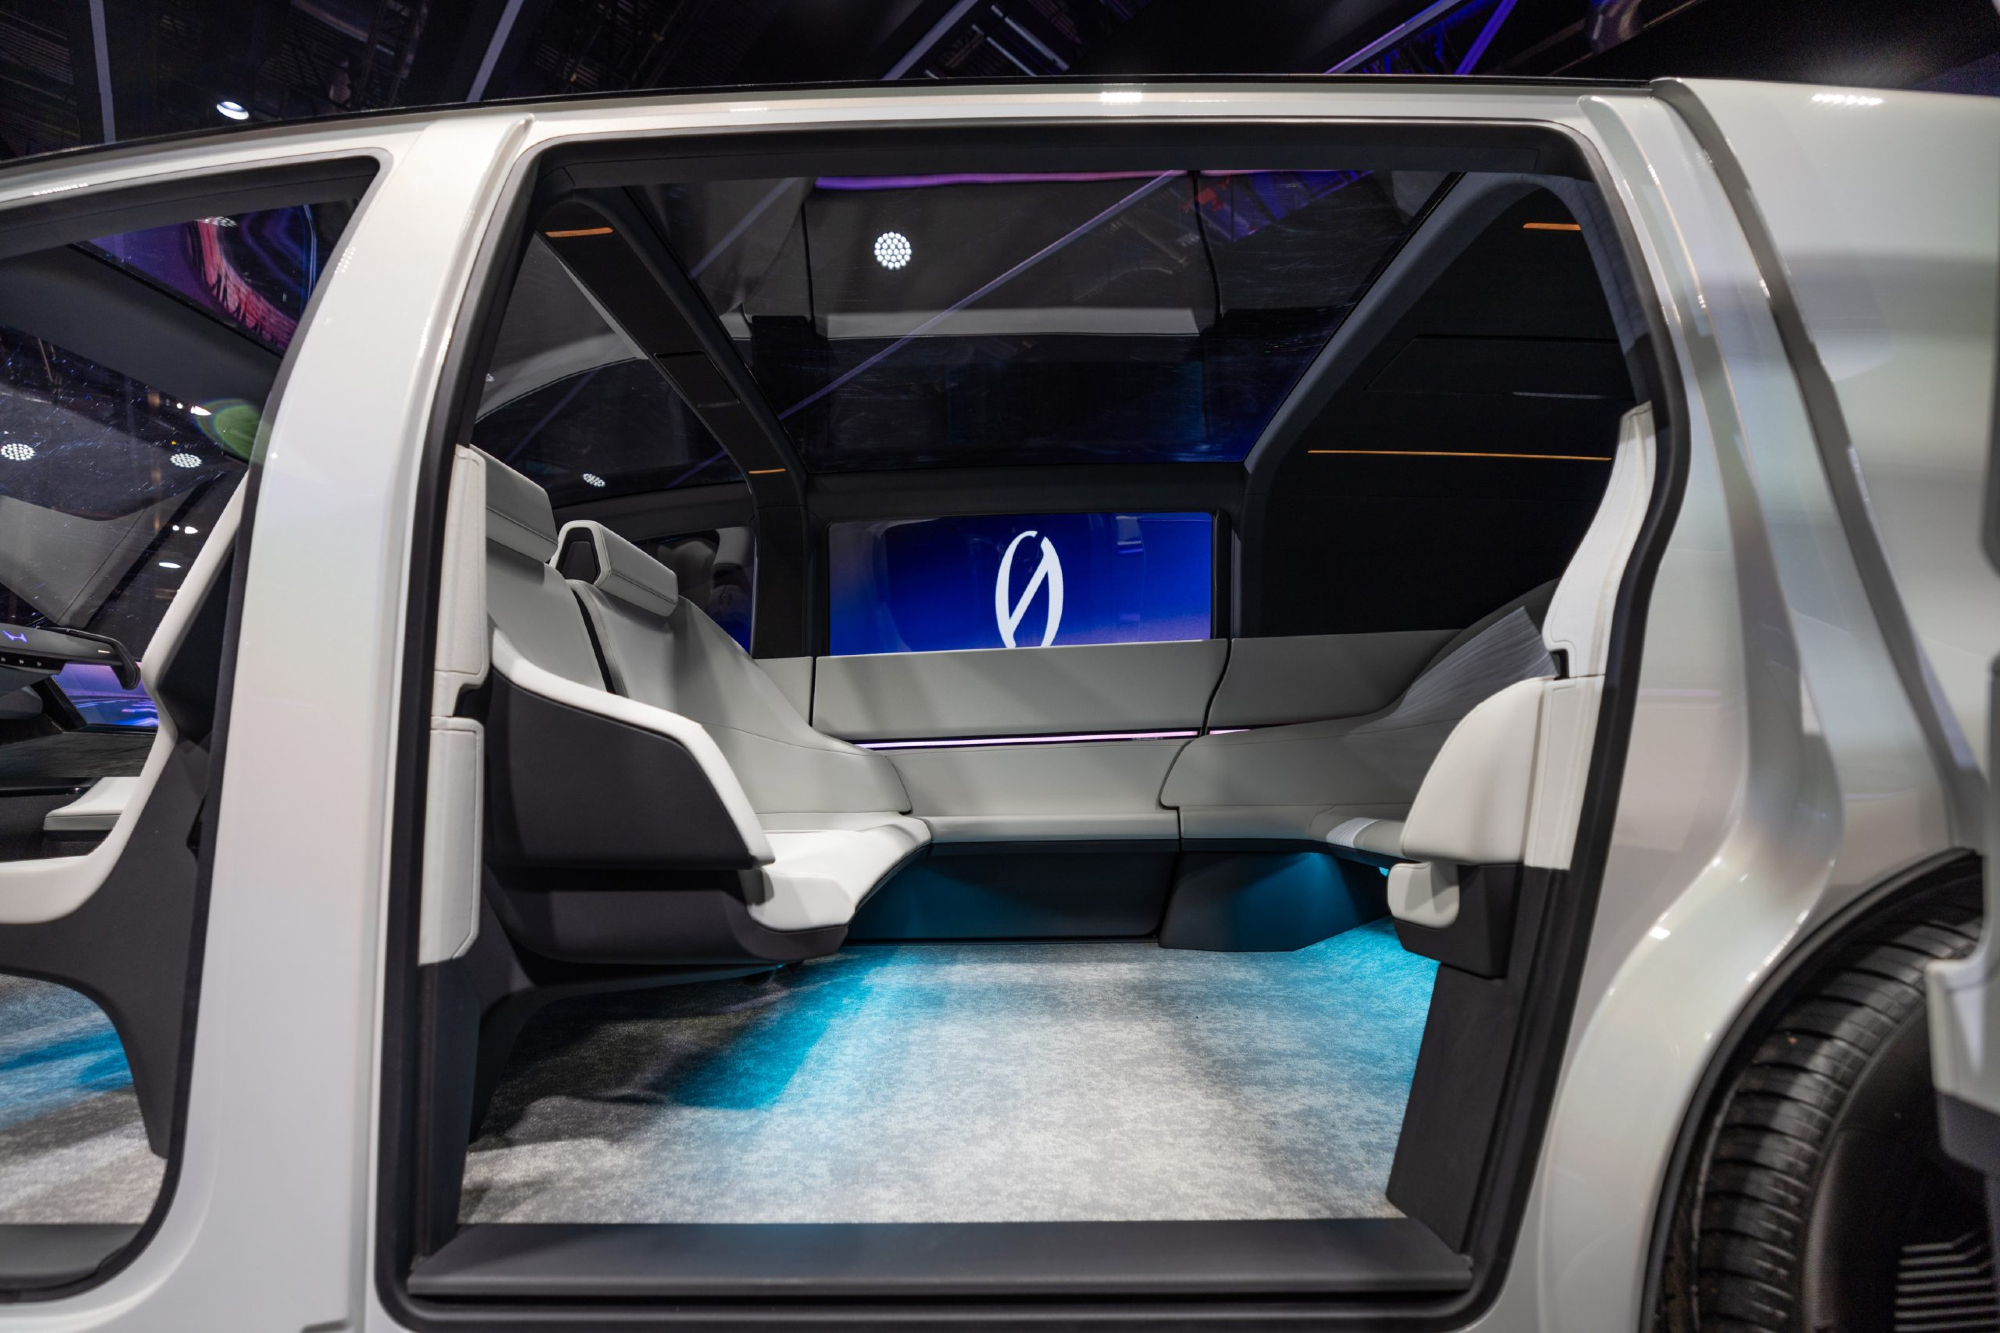 Honda 0 Space-Hub concept EV from left side looking into cabin area behind the drivers front compartment.